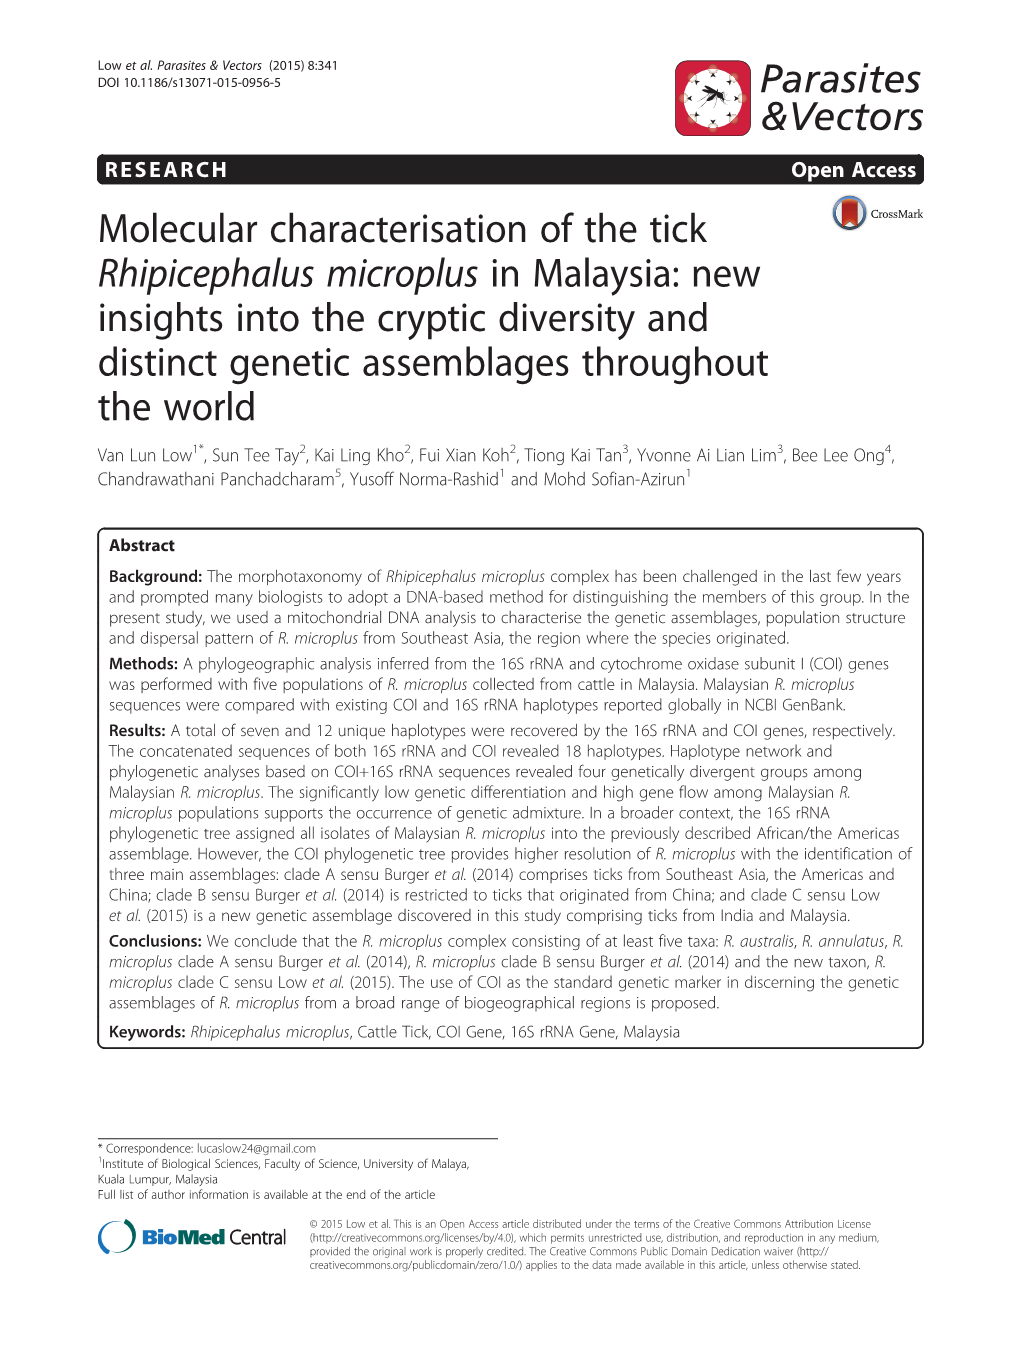 Molecular Characterisation of the Tick Rhipicephalus Microplus in Malaysia